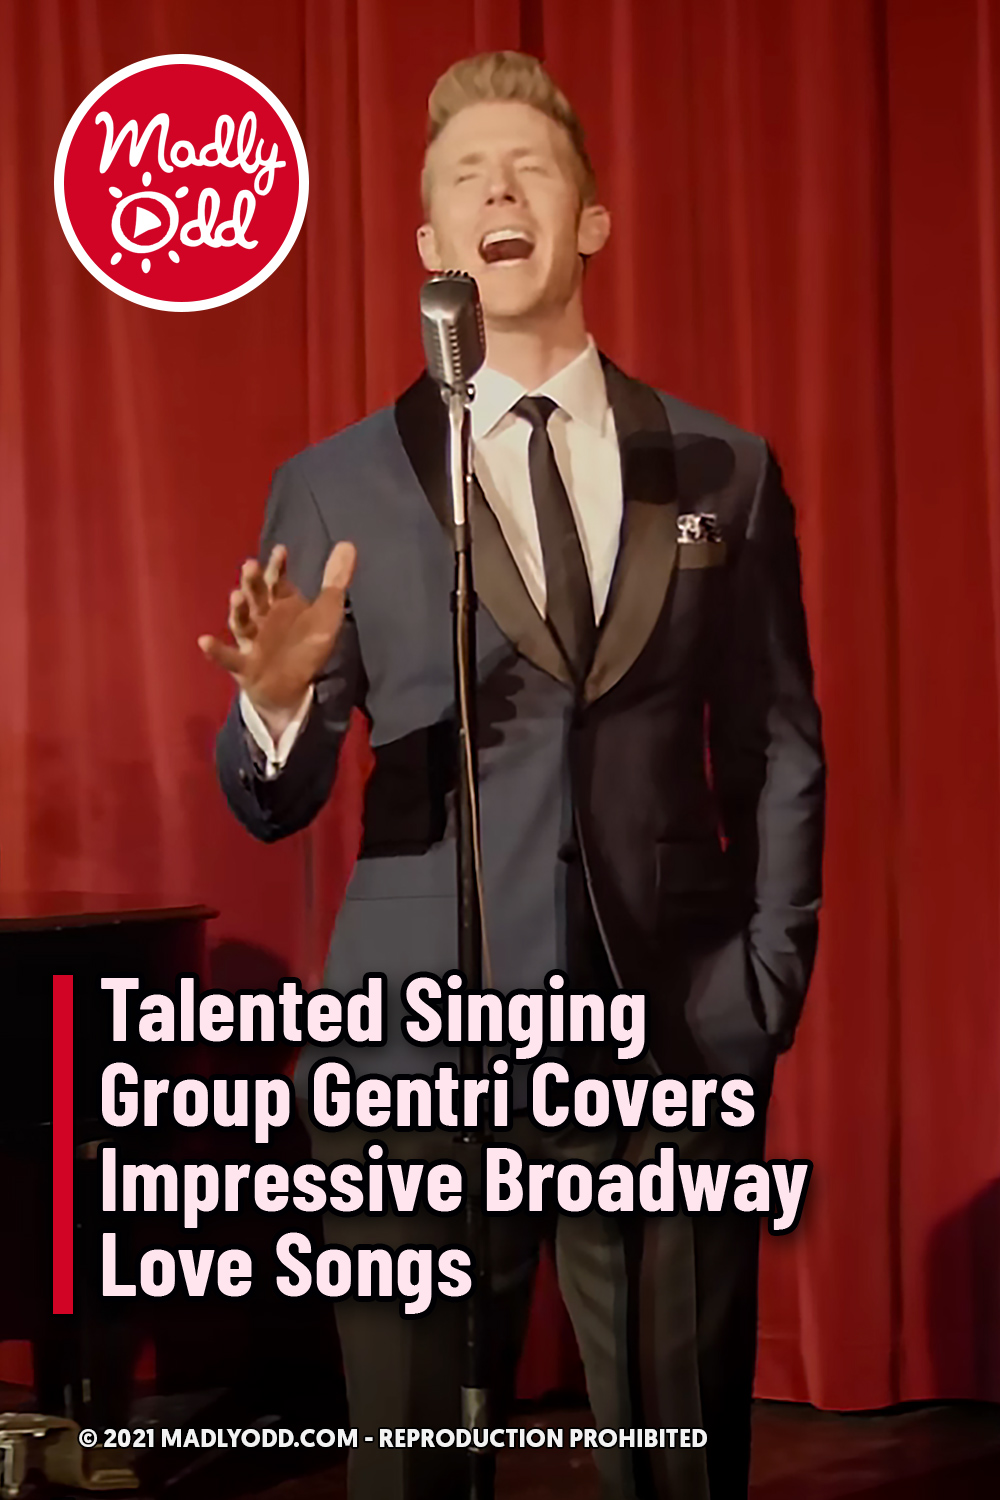 Talented Singing Group Gentri Covers Impressive Broadway Love Songs